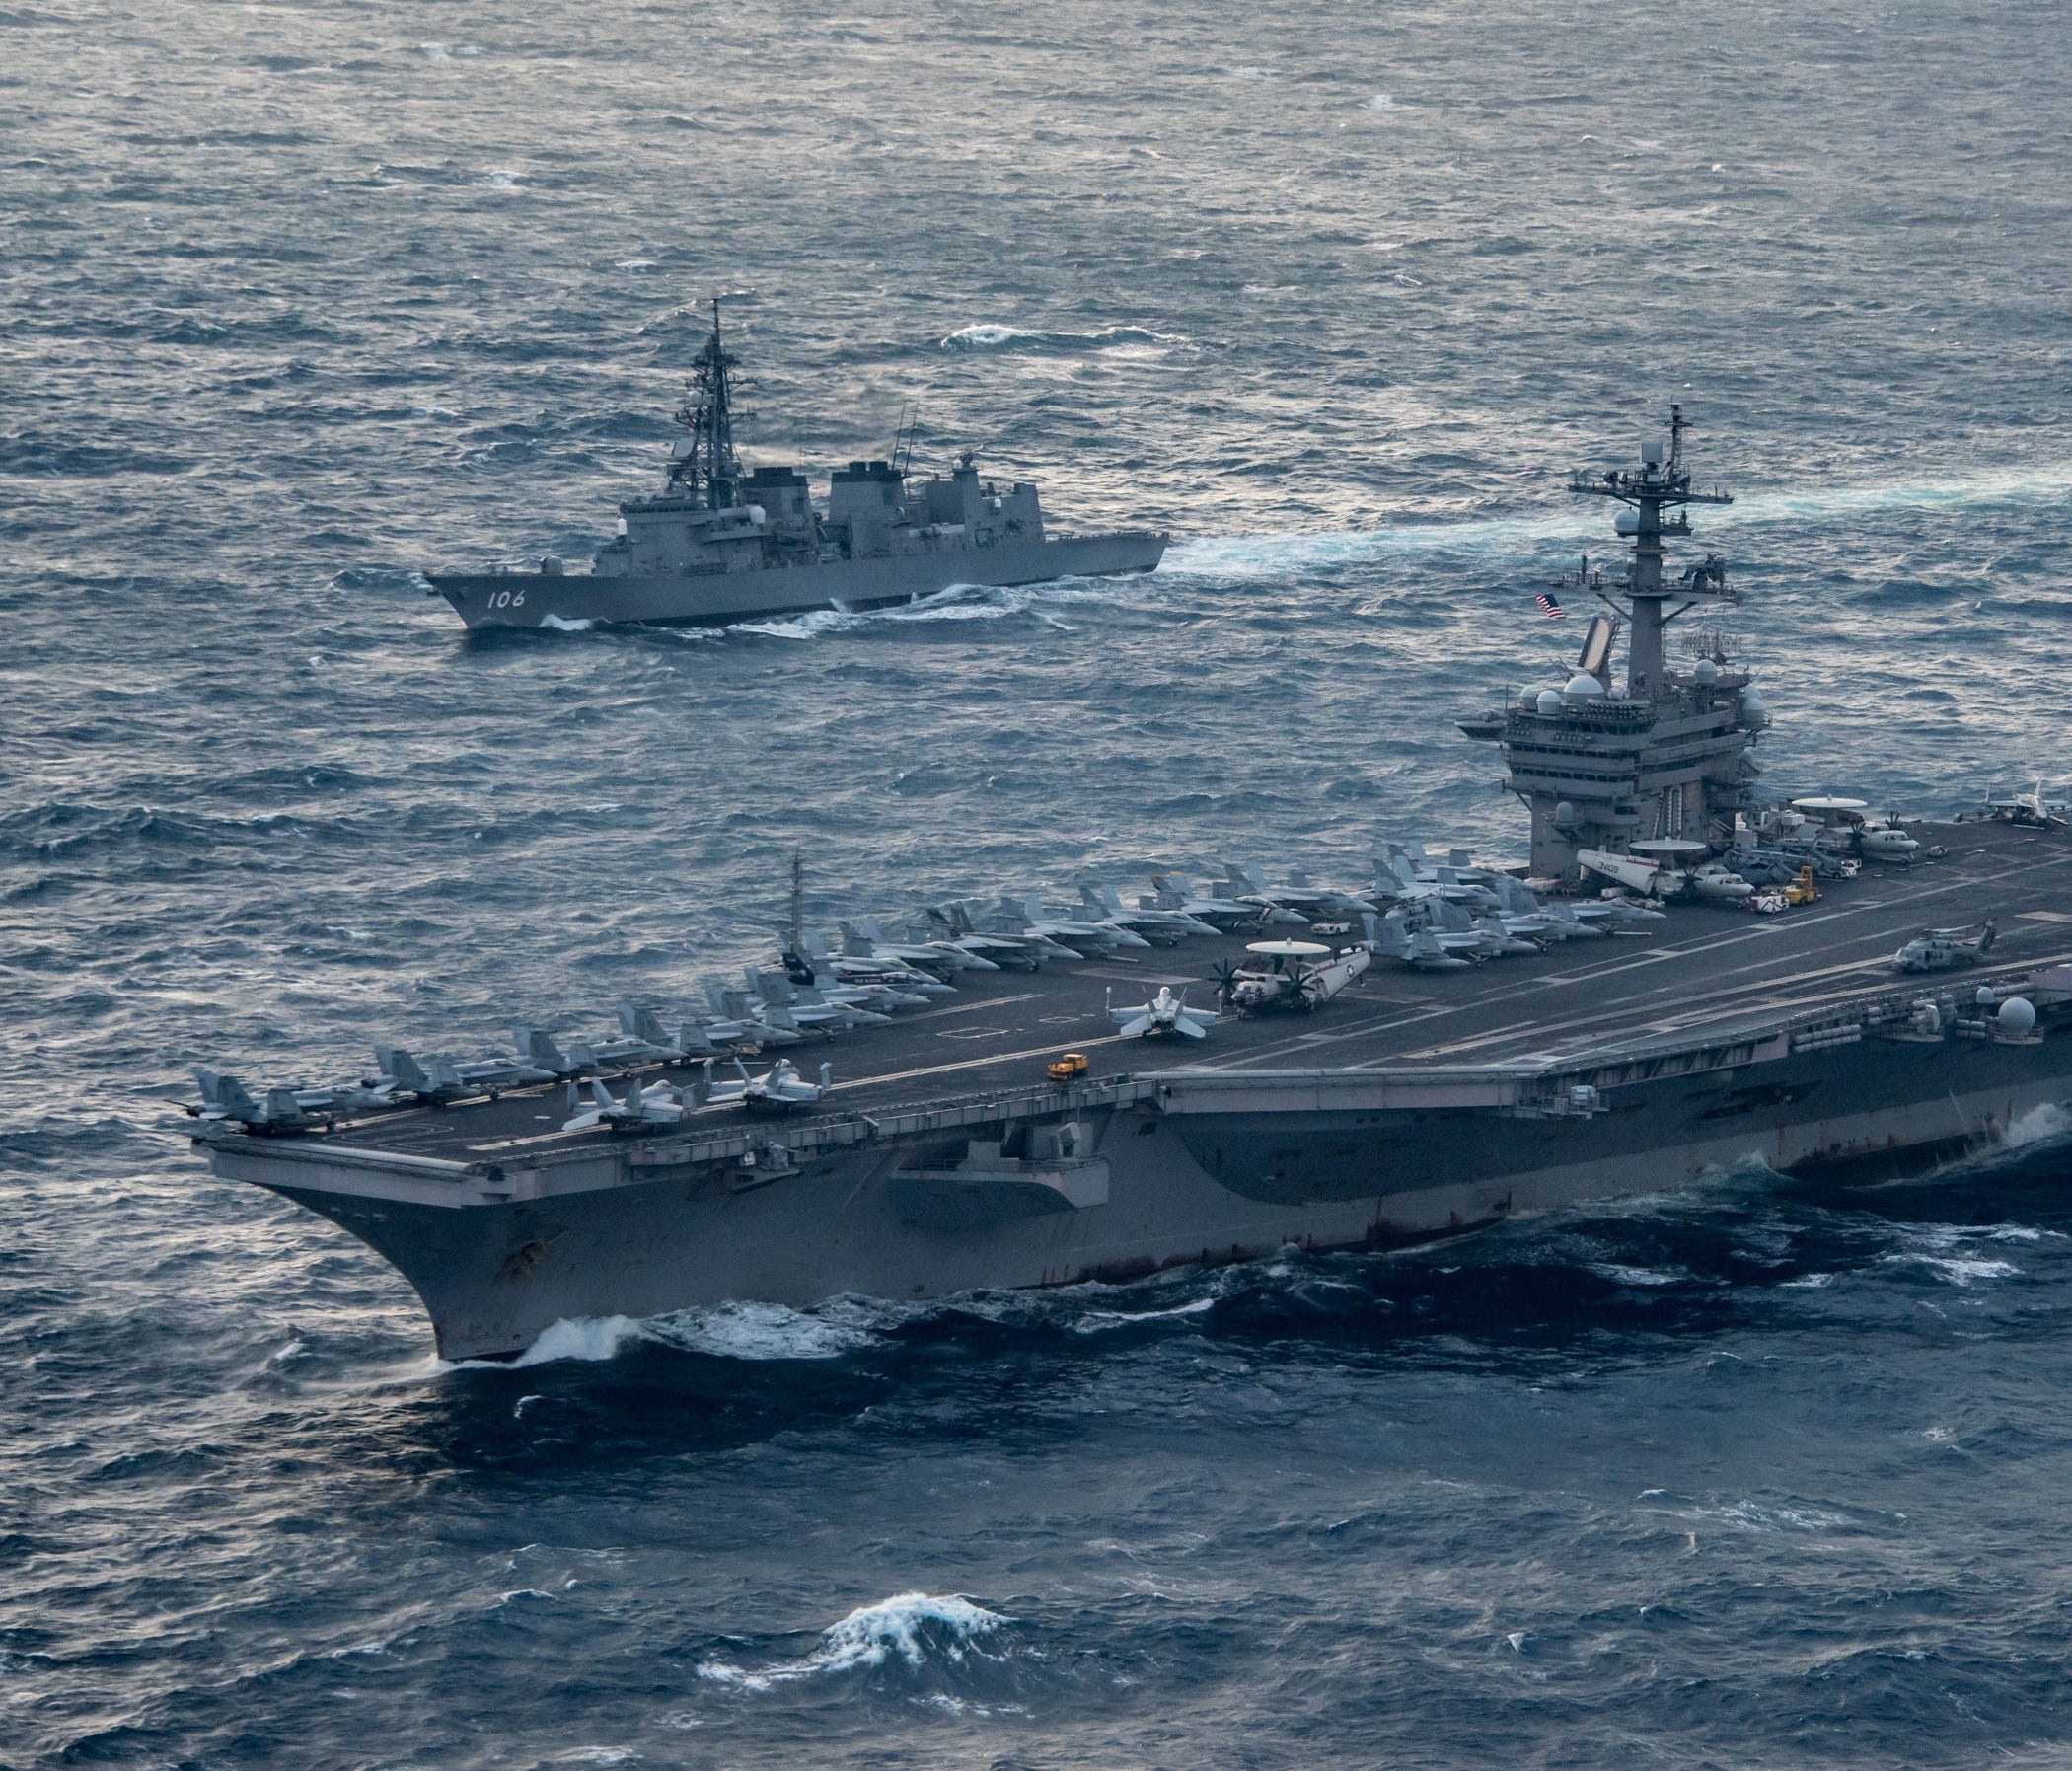 The USS Carl Vinson in the East China Sea on March 9, 2017.